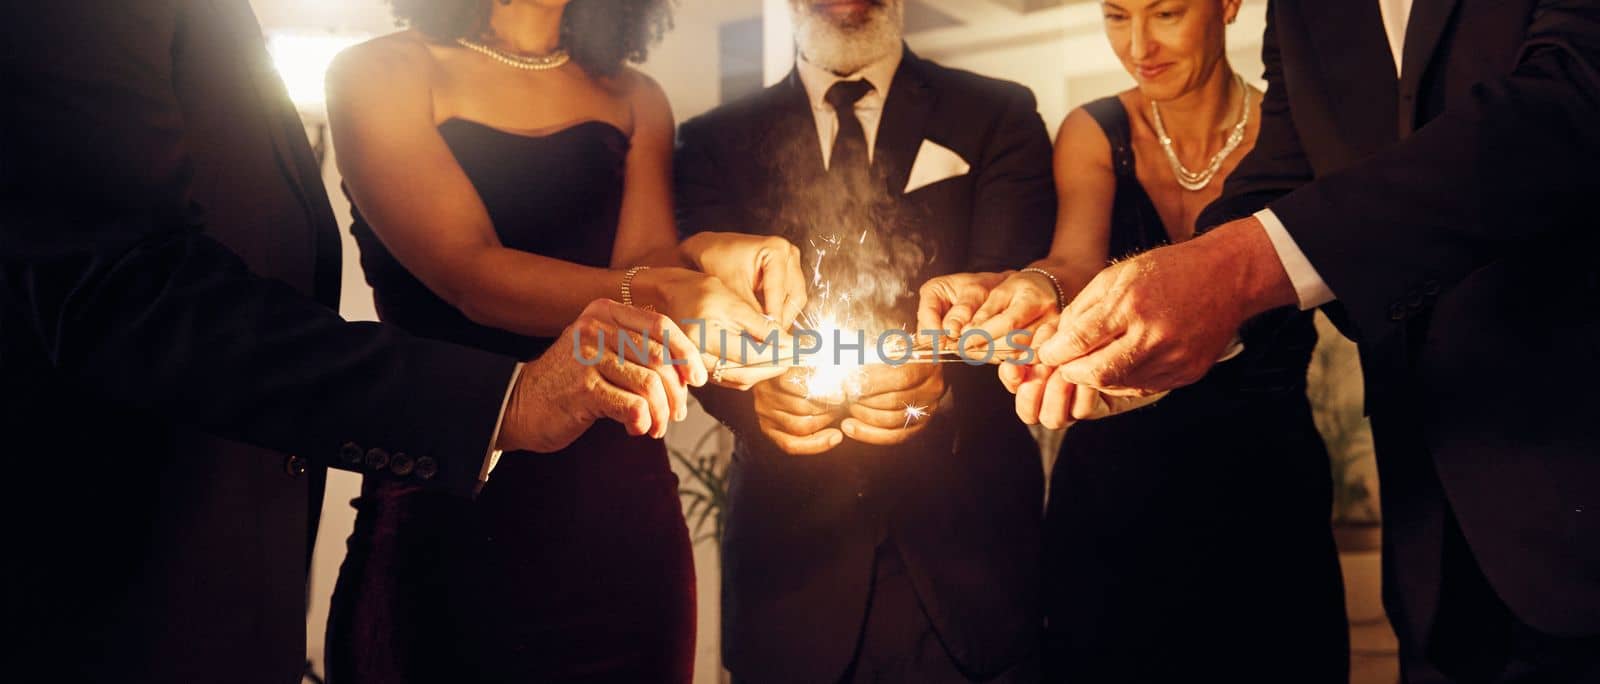 Fire, sparklers and people at a luxury party, event or celebration for new year with formal outfit. Celebrate, matches and group of friends in classy clothes at a black tie gala, banquet or dinner